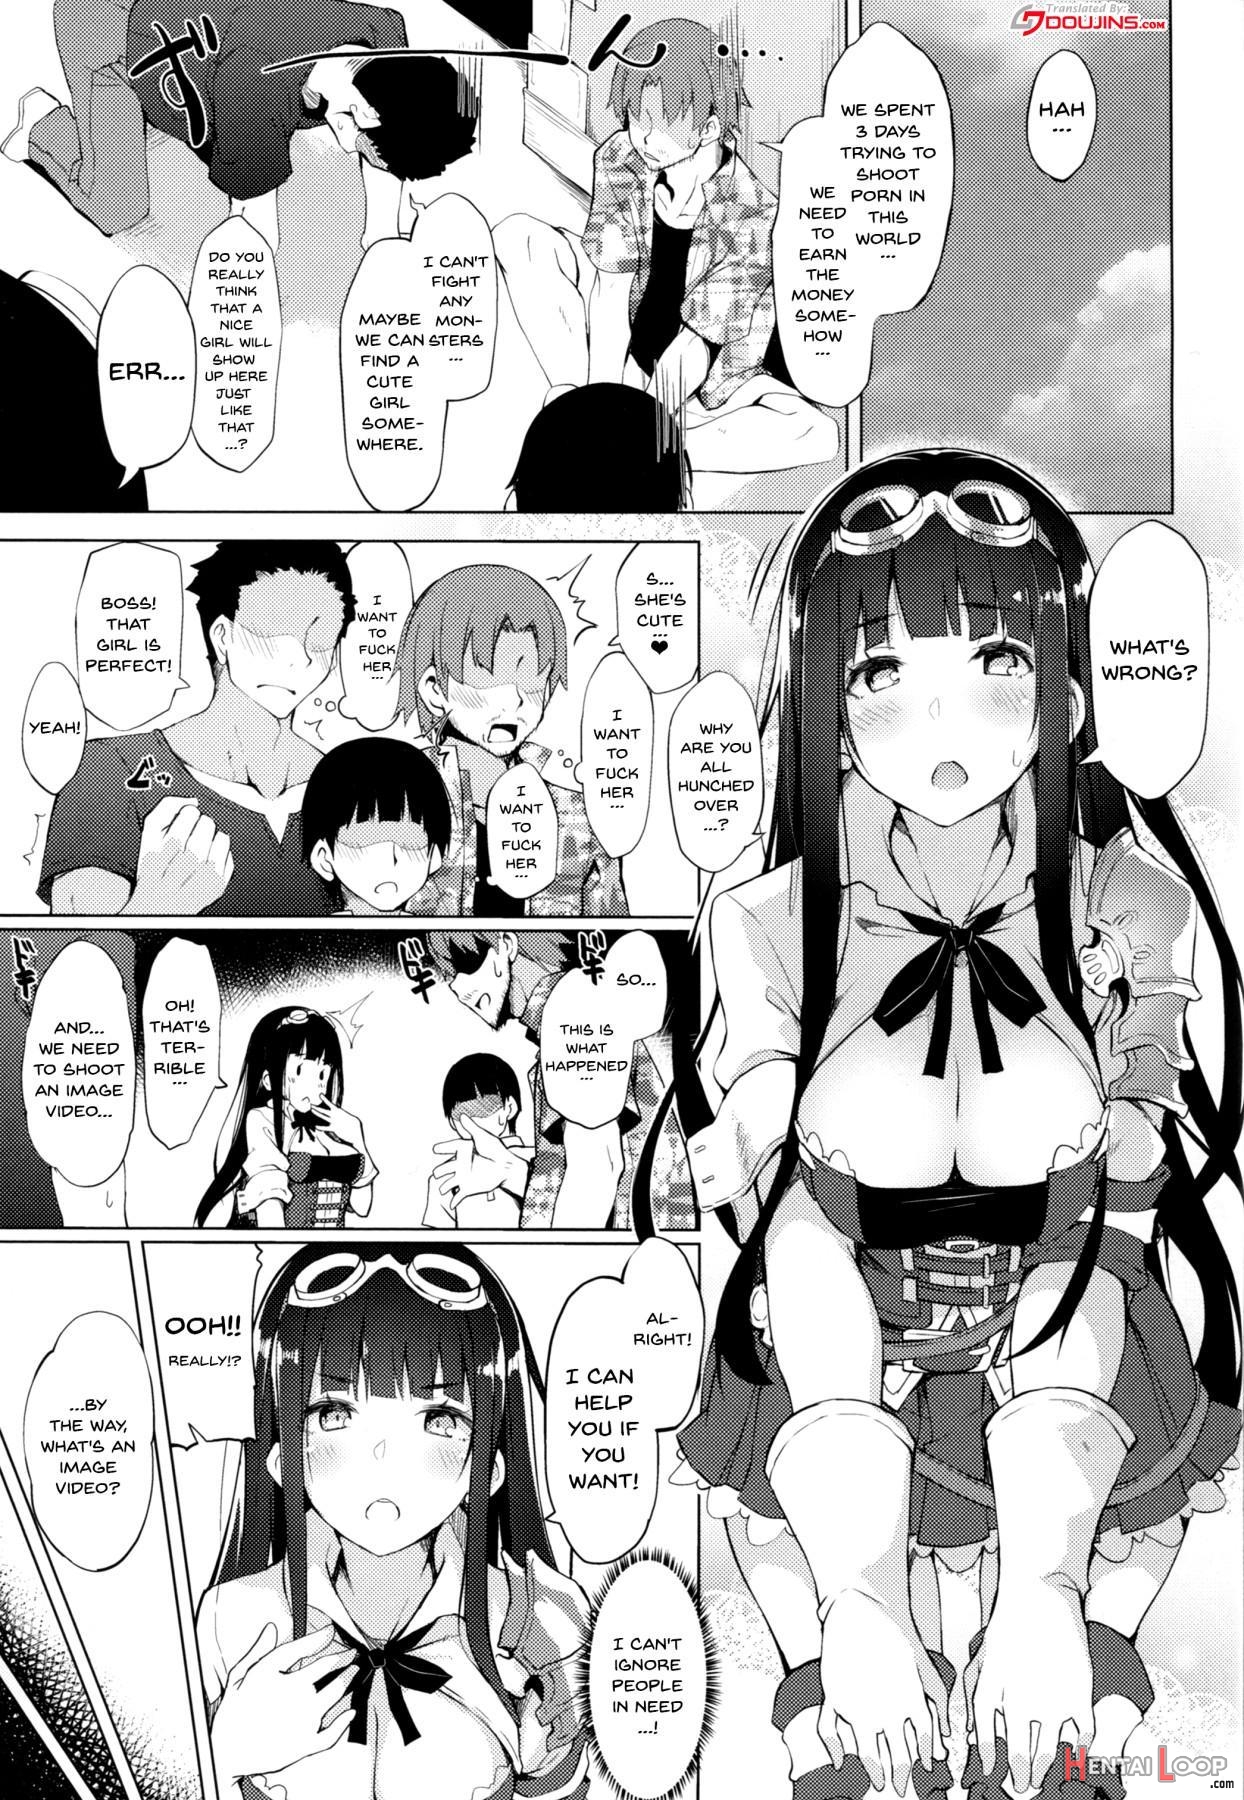 Jessica Oneejessica Onee-chan's Ero Debut page 2